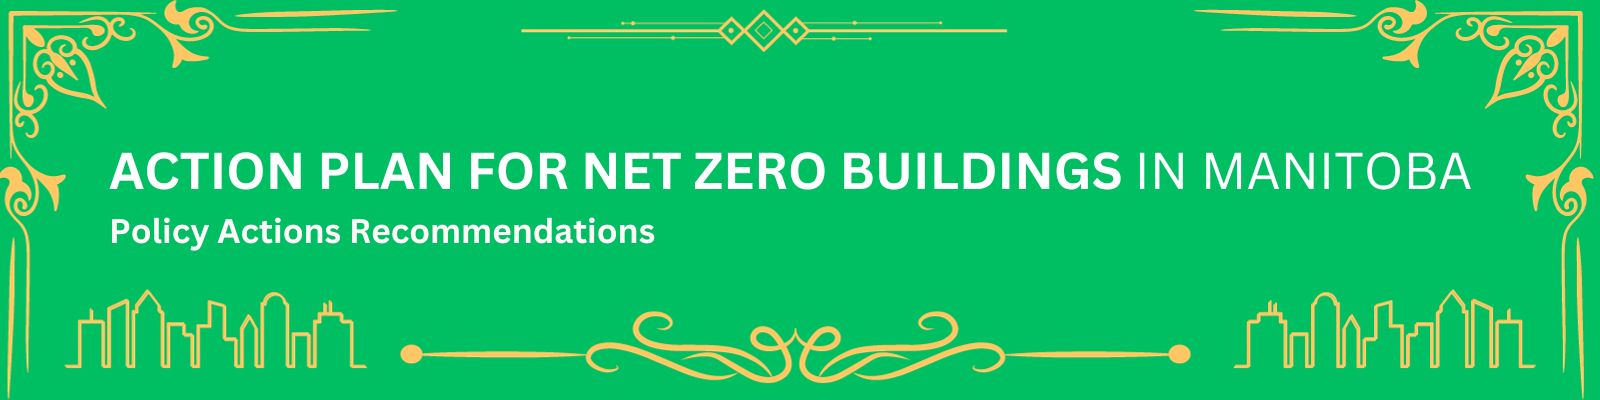 Action plan for net zero buildings in Manitoba policy action recommendations